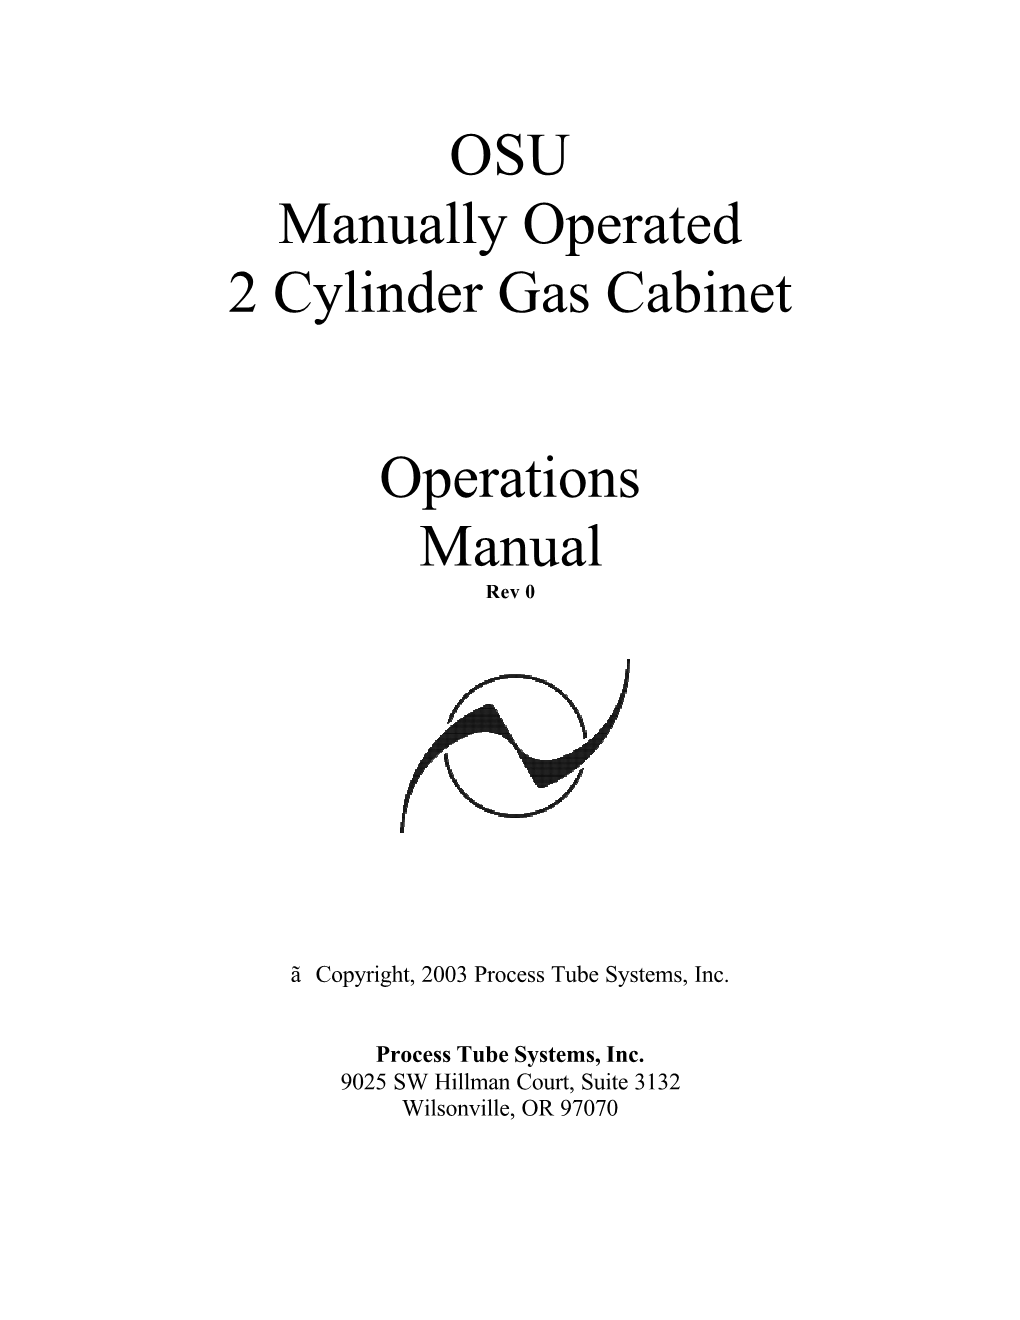 OSU Manually Operated 2 Cylinder Gas Cabinet Operations Manual